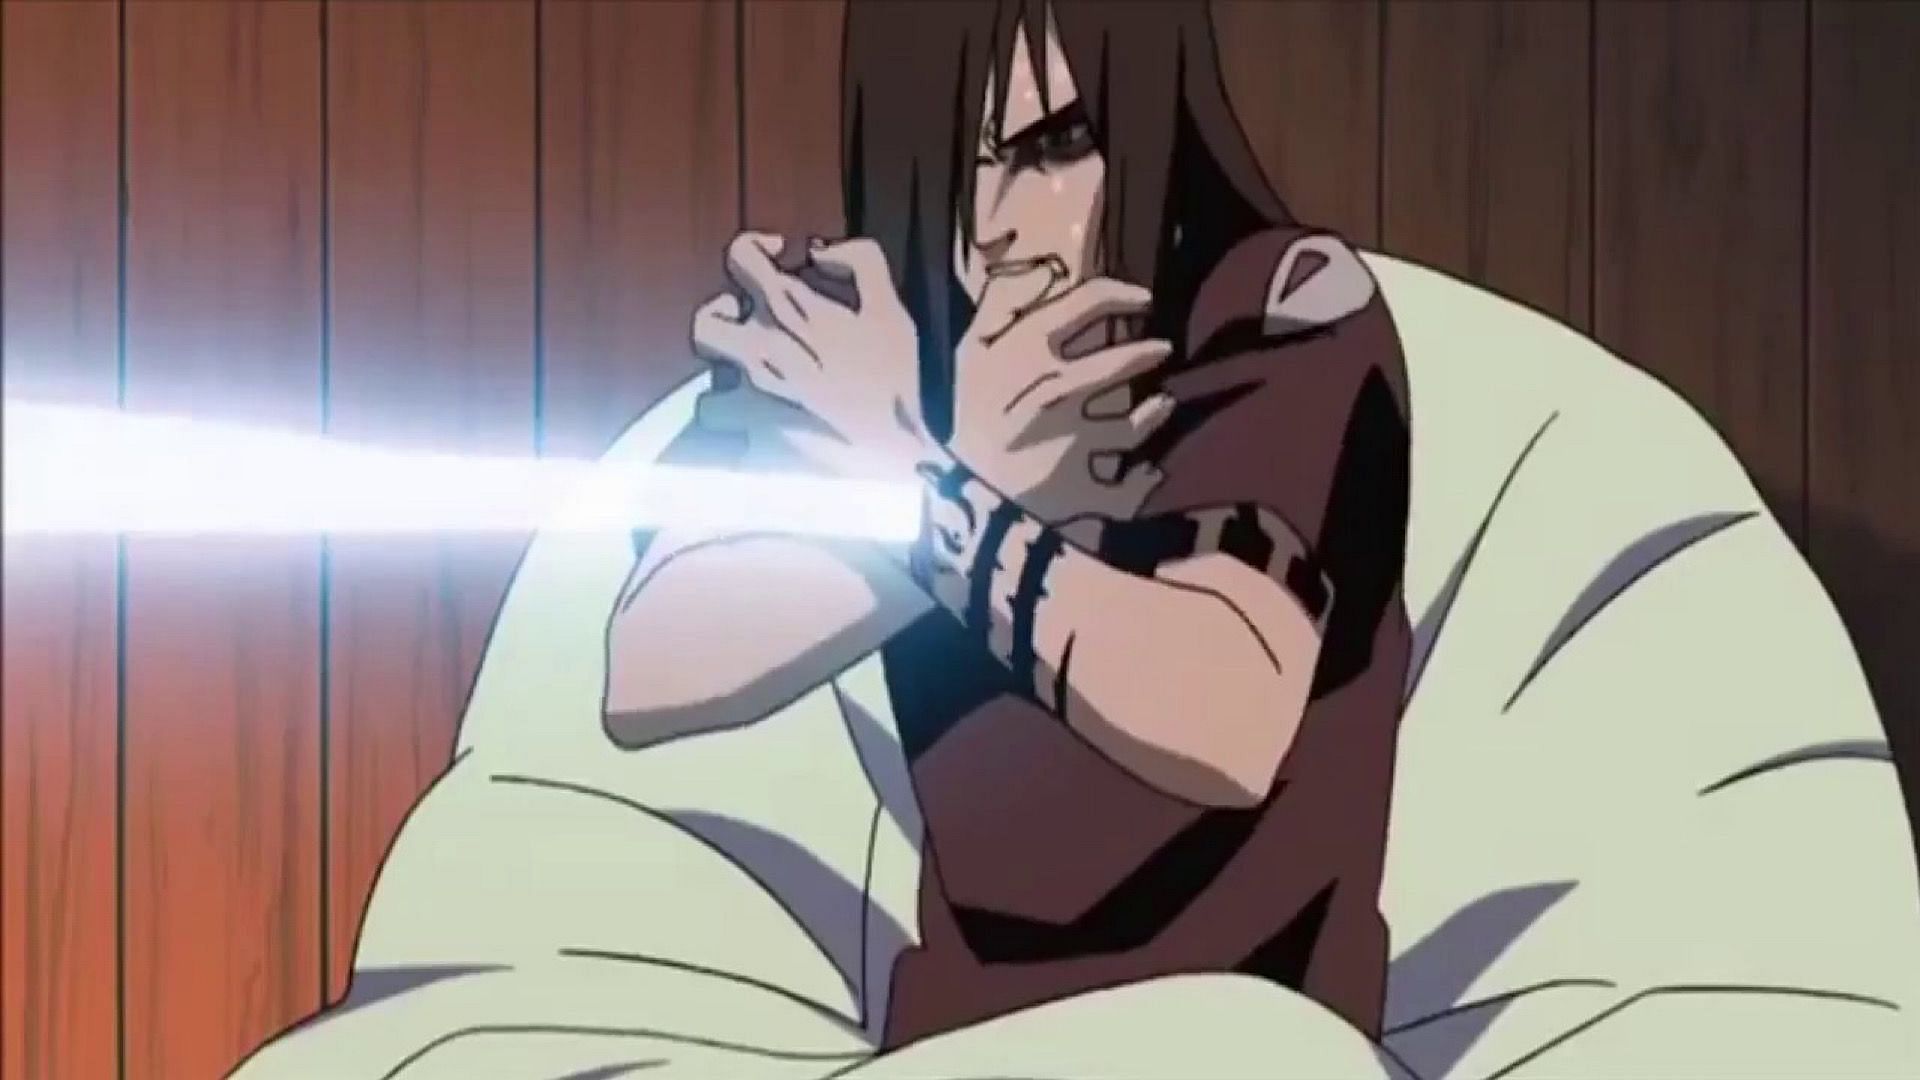 Orochimaru possessed the bodies of others (Image via Naruto anime)